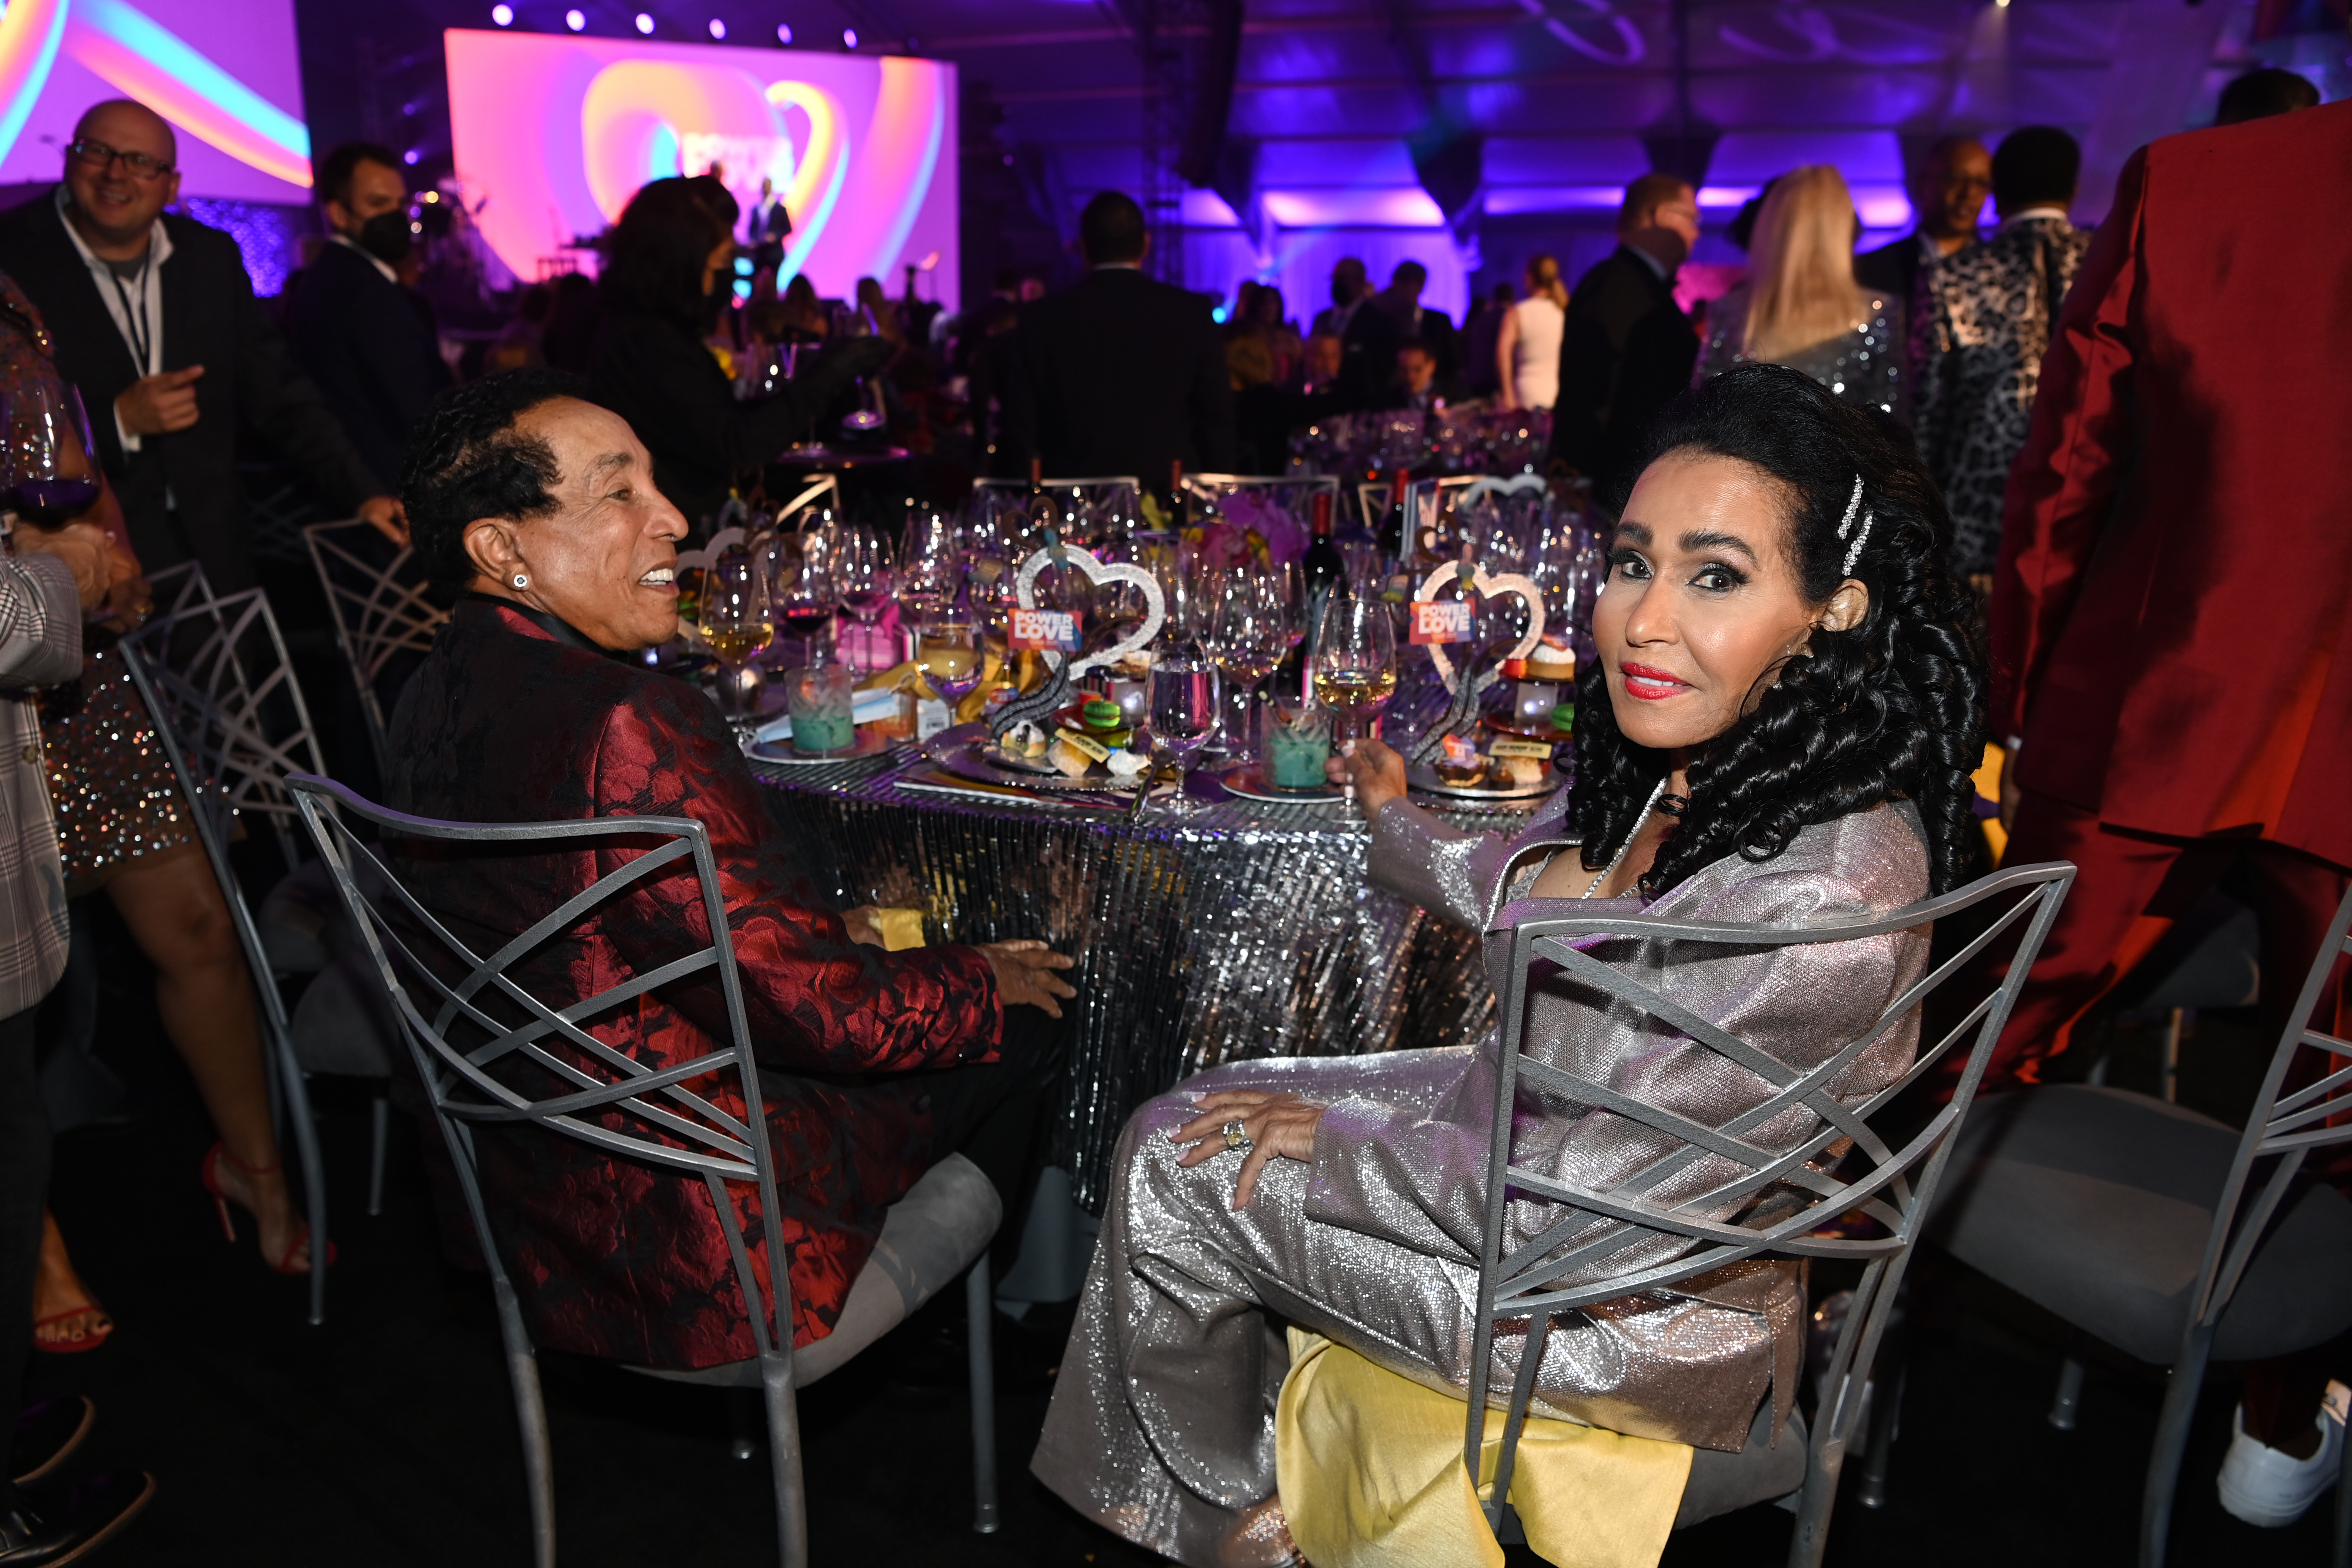 Smokey Robinson and Frances Glandney attend the 25th annual Keep Memory Alive 'Power of Love Gala' benefit for the Cleveland Clinic Lou Ruvo Center for Brain Health at Resorts World Las Vegas, on October 16, 2021, in Las Vegas, Nevada. | Source: Getty Images